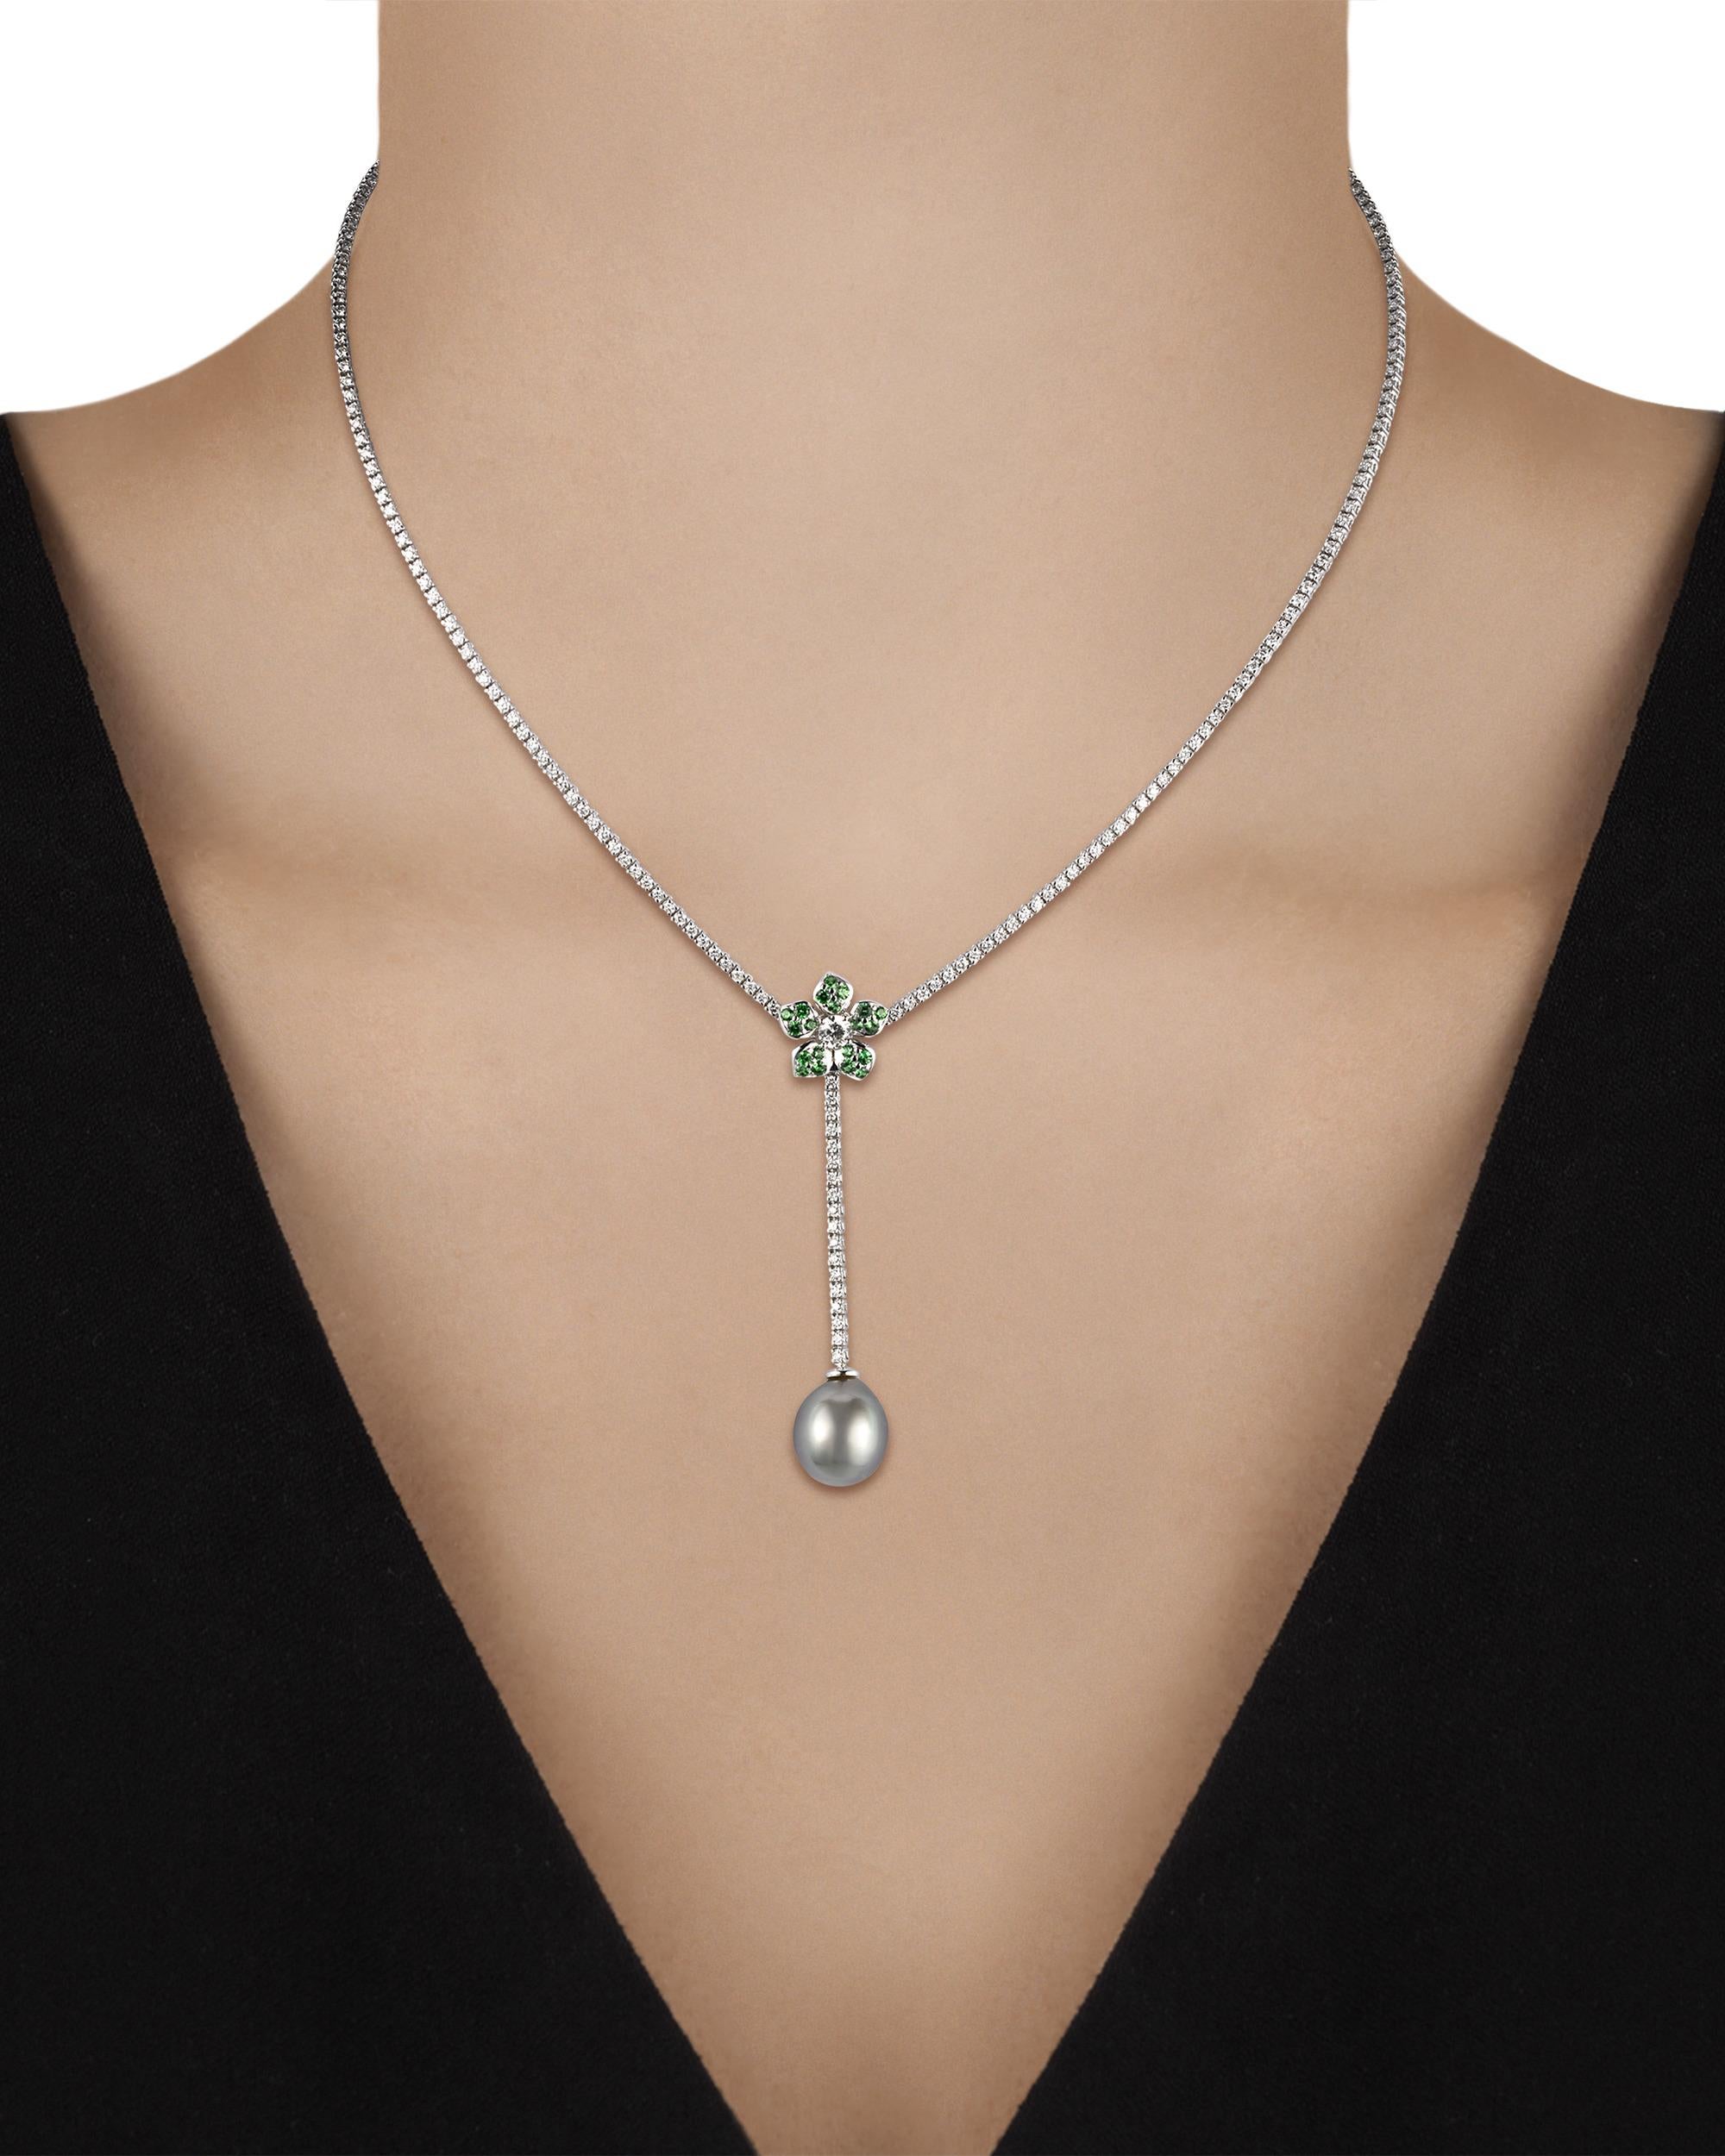 An 11mm Tahitian pearl elegantly drops from a blossom encrusted with 0.43 carat of bright tsavorites in this necklace. White diamonds totaling 2.92 carats offer sparkle throughout the 18K white gold setting.

Necklace: 16